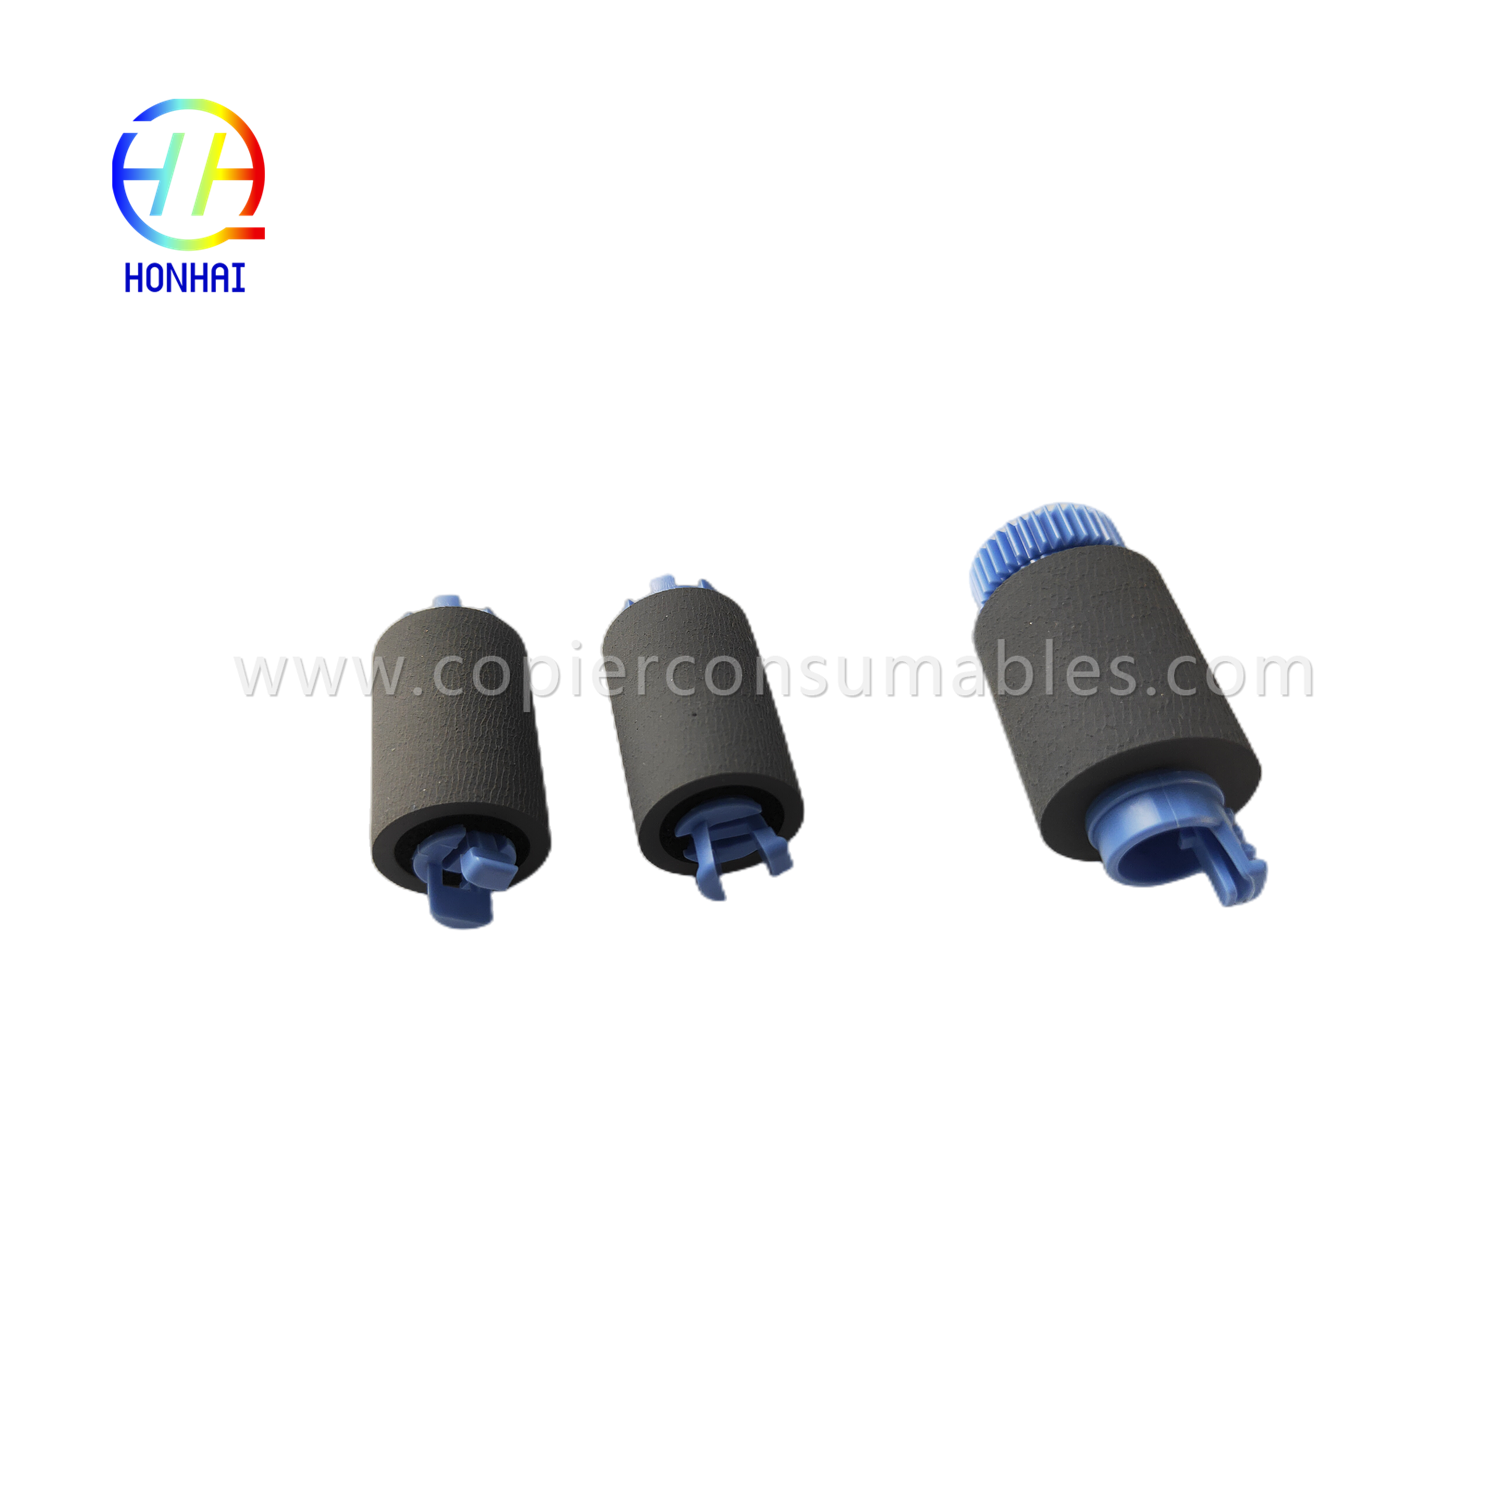 https://www.copierconsumables.com/tray-2-5-pickup-feed-separation-roller-set-for-hp-a7w93-67082-mfp-785f-780dn-e77650z-e77660z-e77650dn-e707p p77750z-p77760z-p75050dn-p75050dw-táirge/